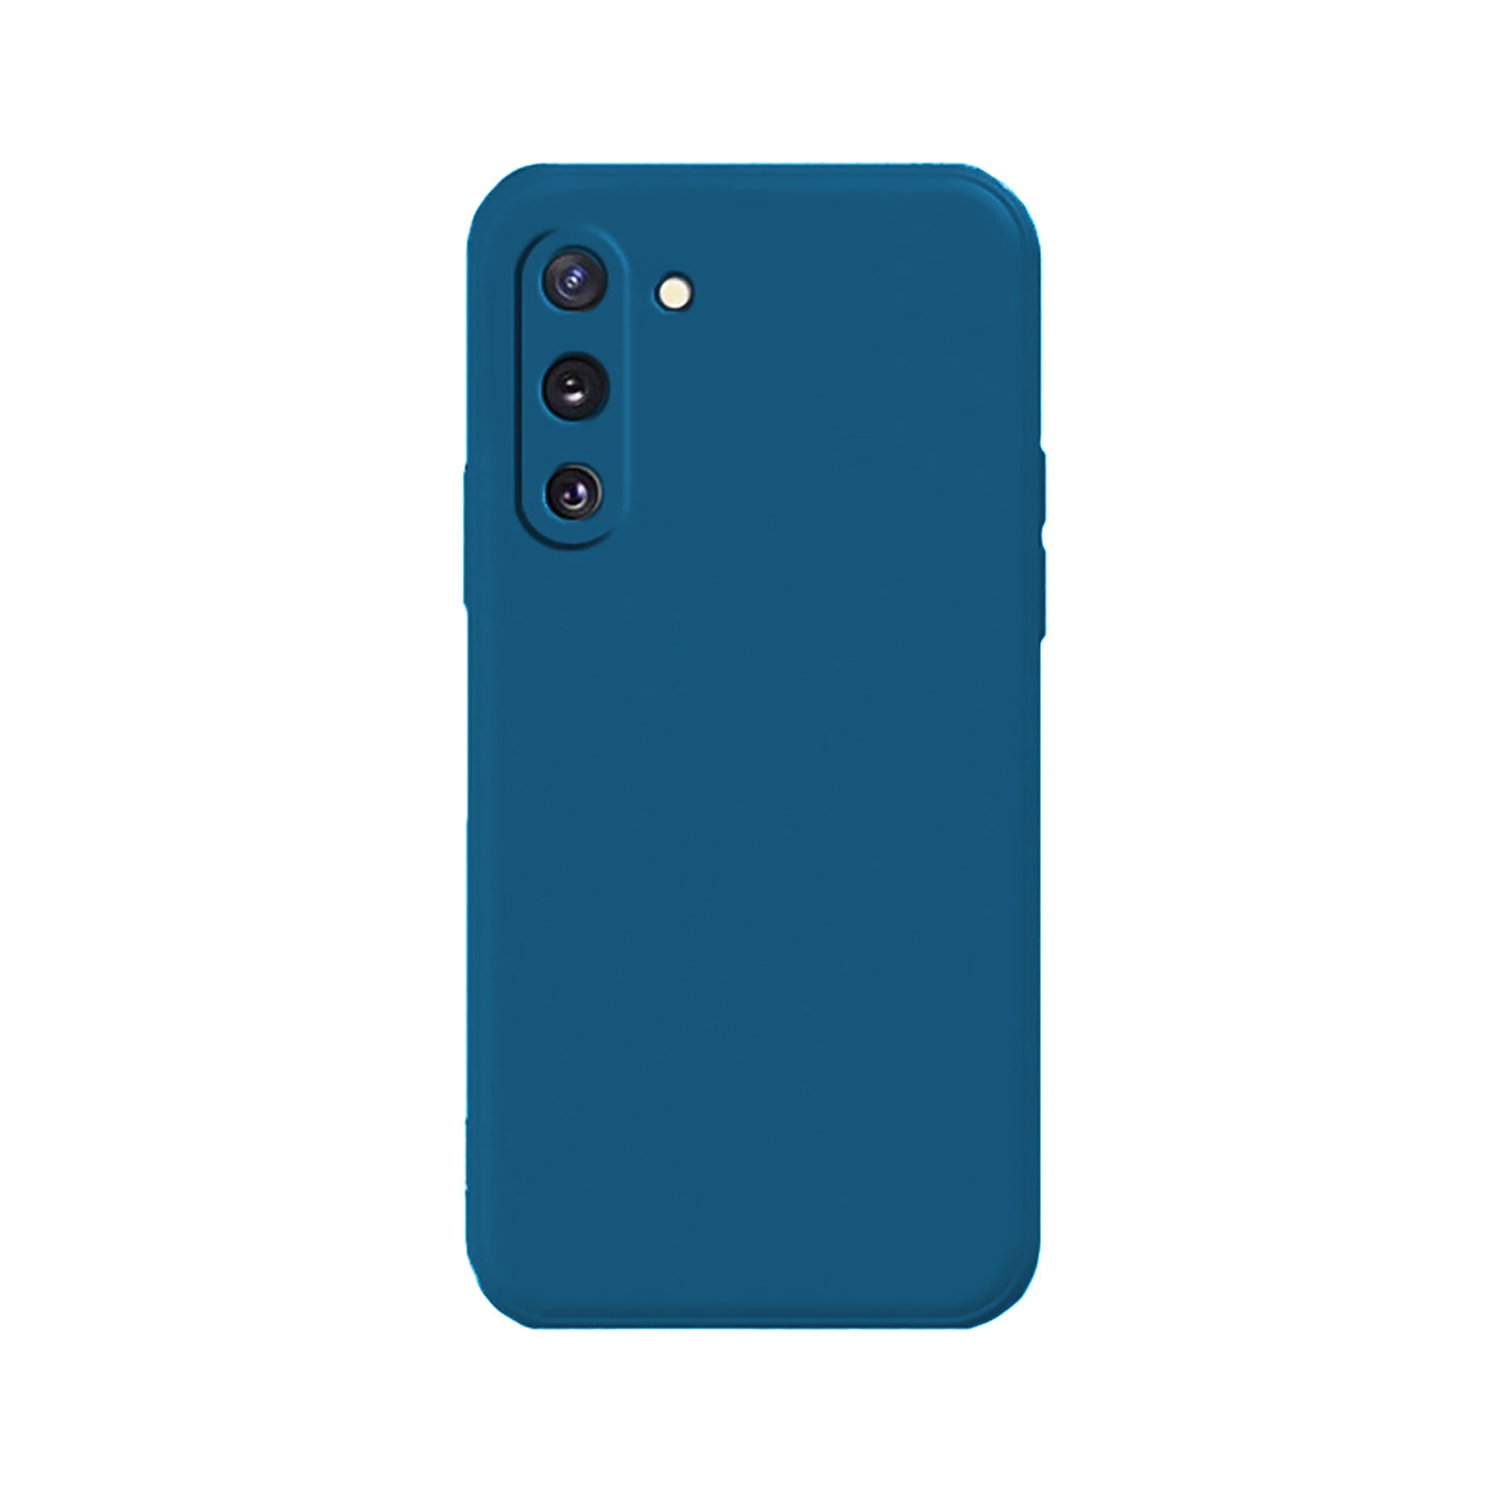 PANDACO Soft Shell Matte Navy Case for Samsung Galaxy Note 10